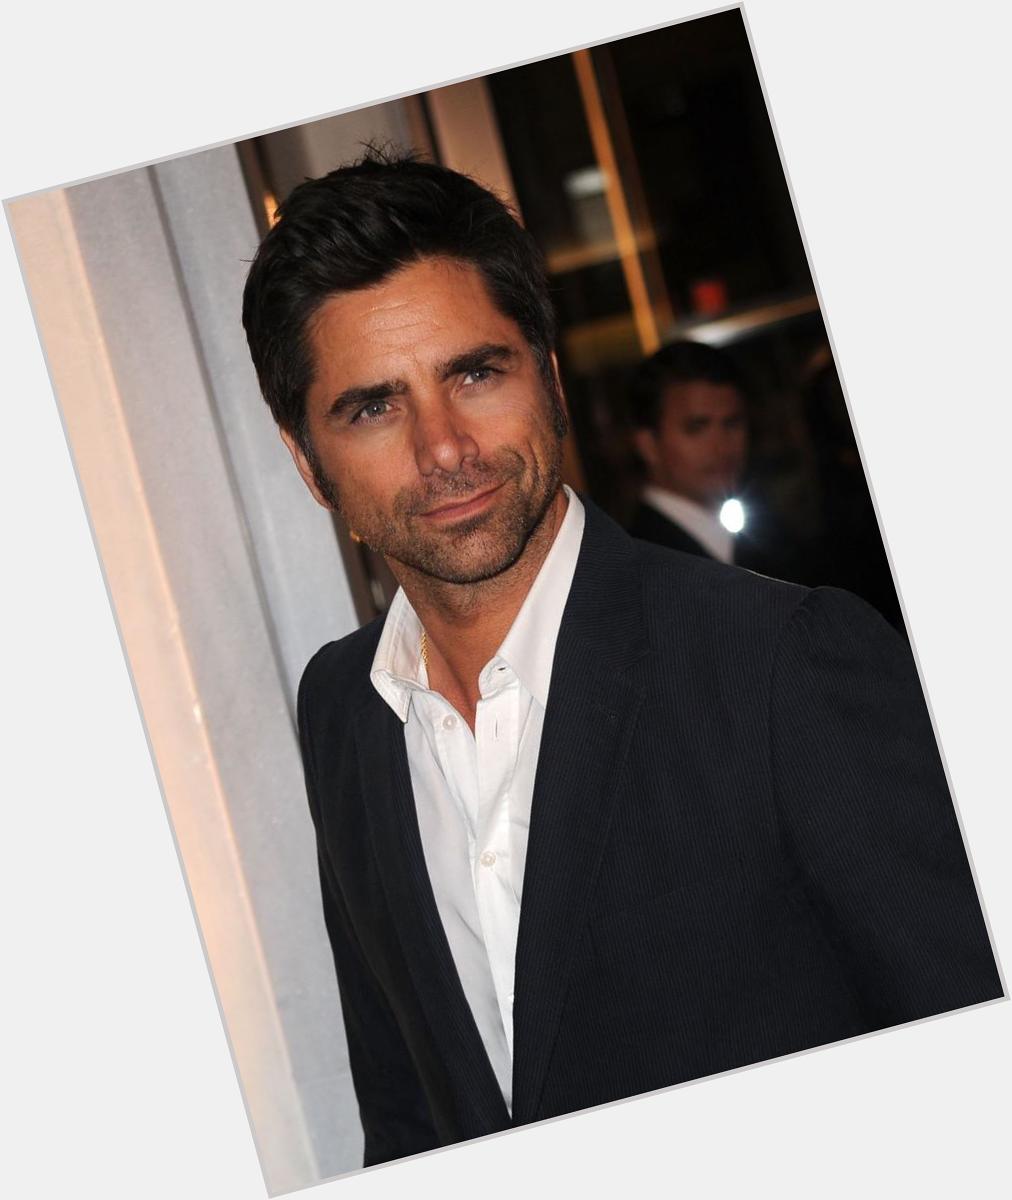 John Stamos pretty fricken hot for 52!! Yes he turned 52 today!!! Happy birthday handsome  